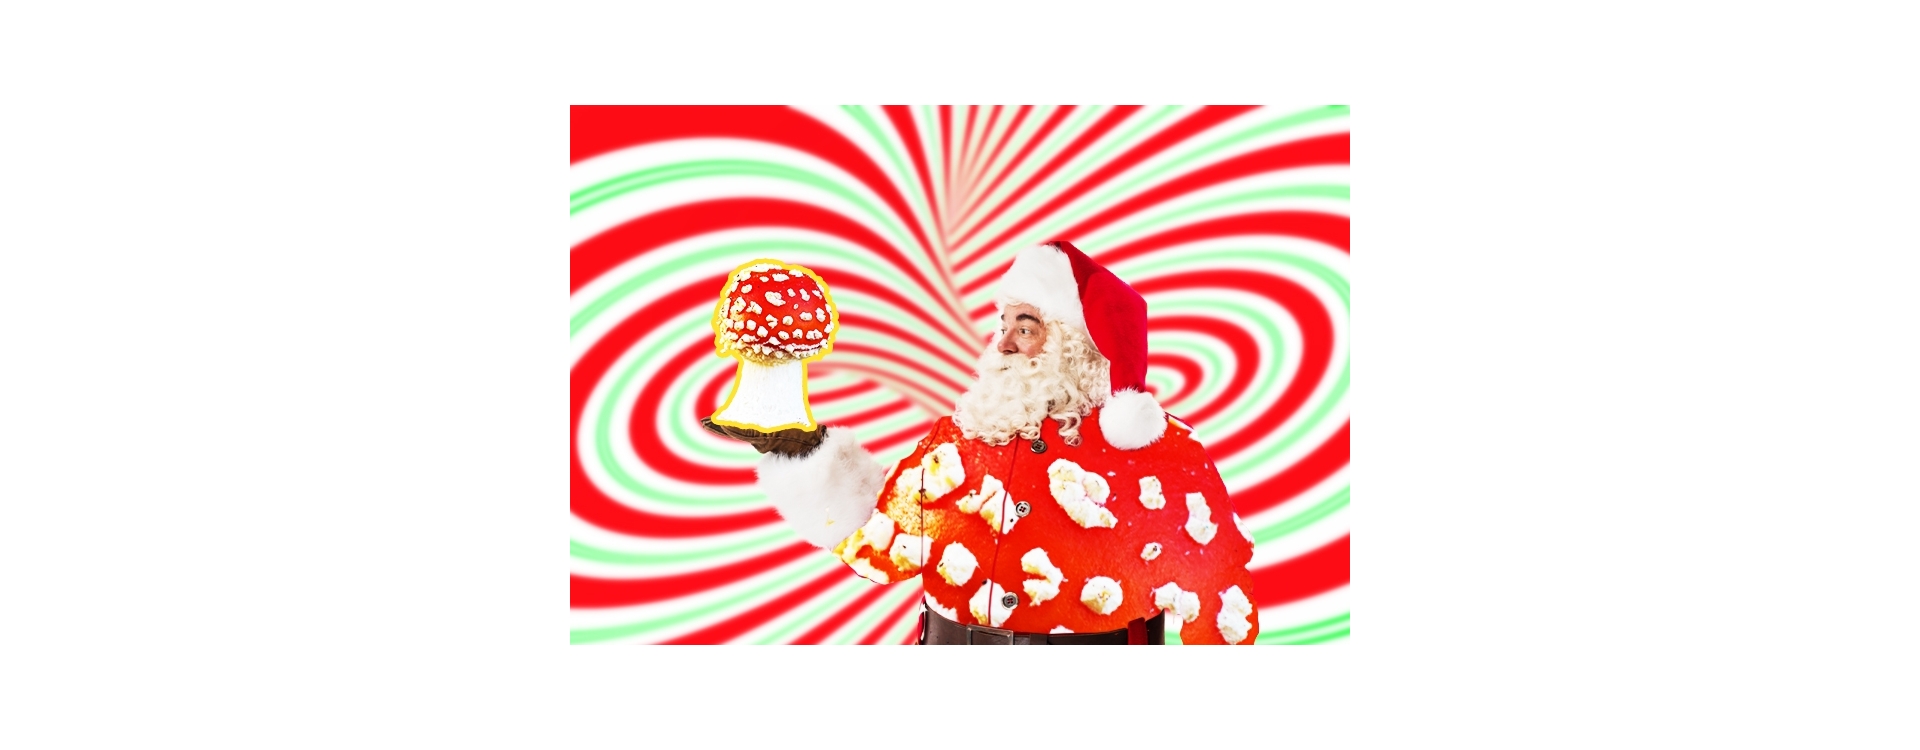 Does Santa Have Anything to Do with Magic Mushrooms? Let’s Look at the History.